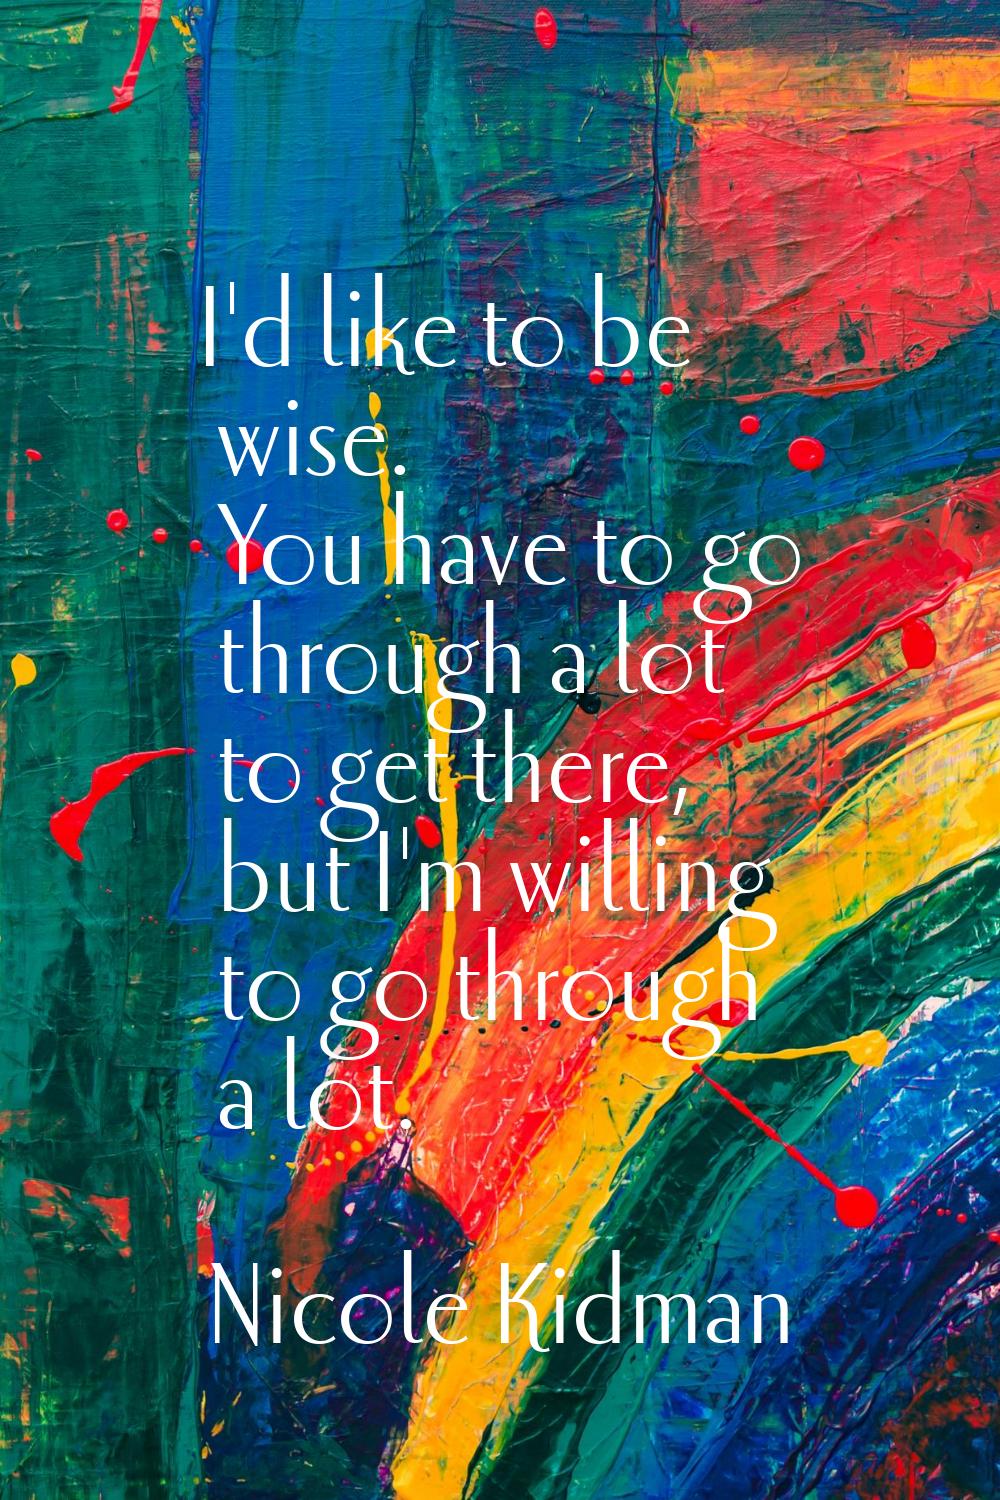 I'd like to be wise. You have to go through a lot to get there, but I'm willing to go through a lot